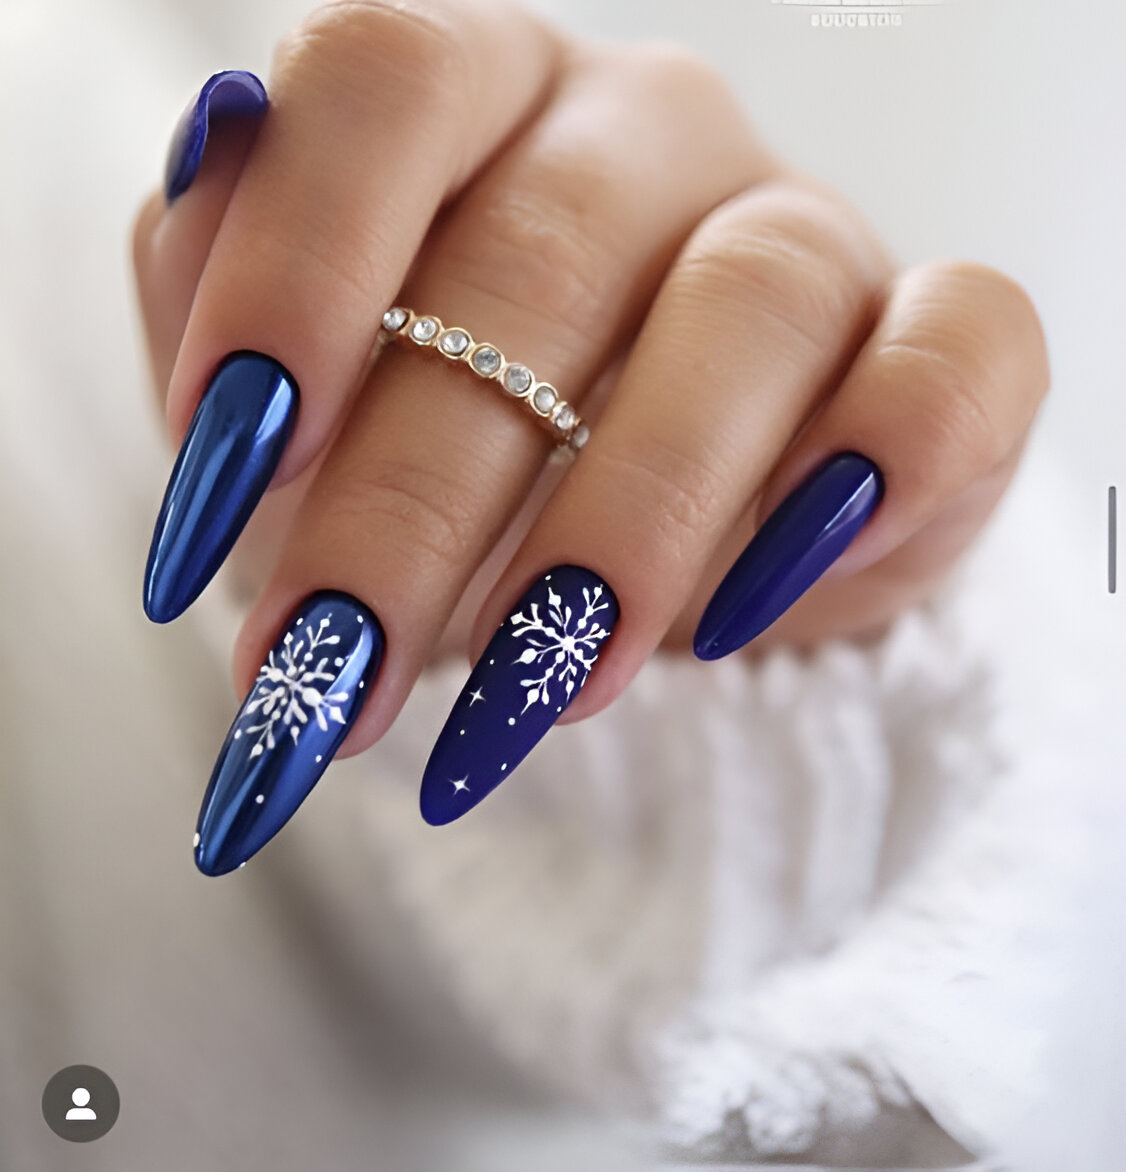 Blue Nails With White Snow Design